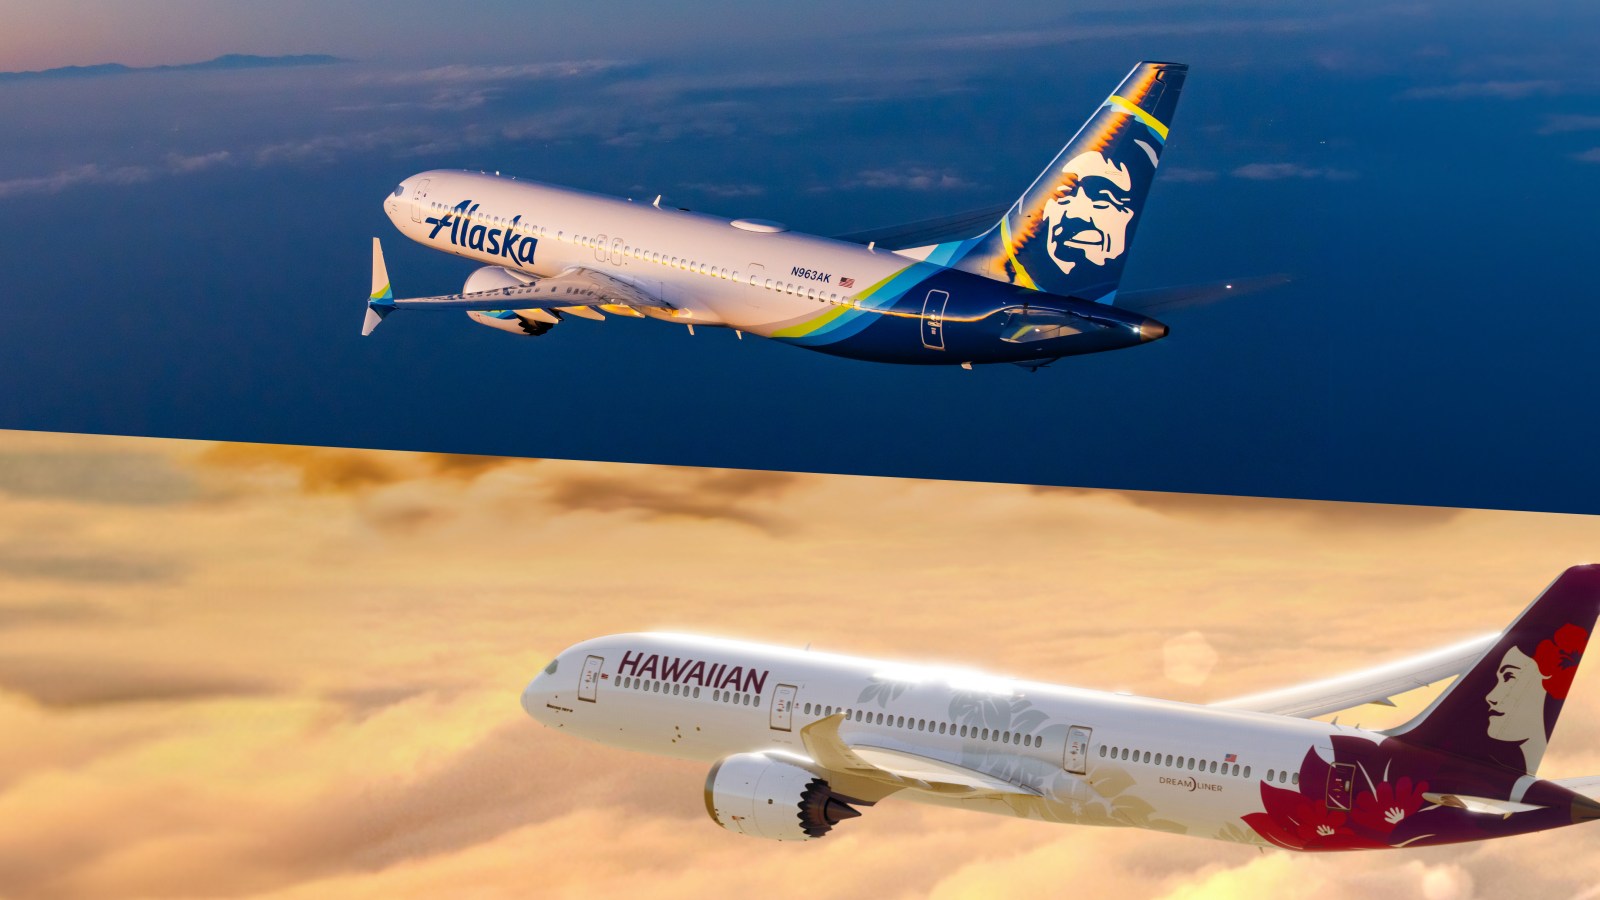 Alaska Airlines and Hawaiian Airlines to Combine, Expanding